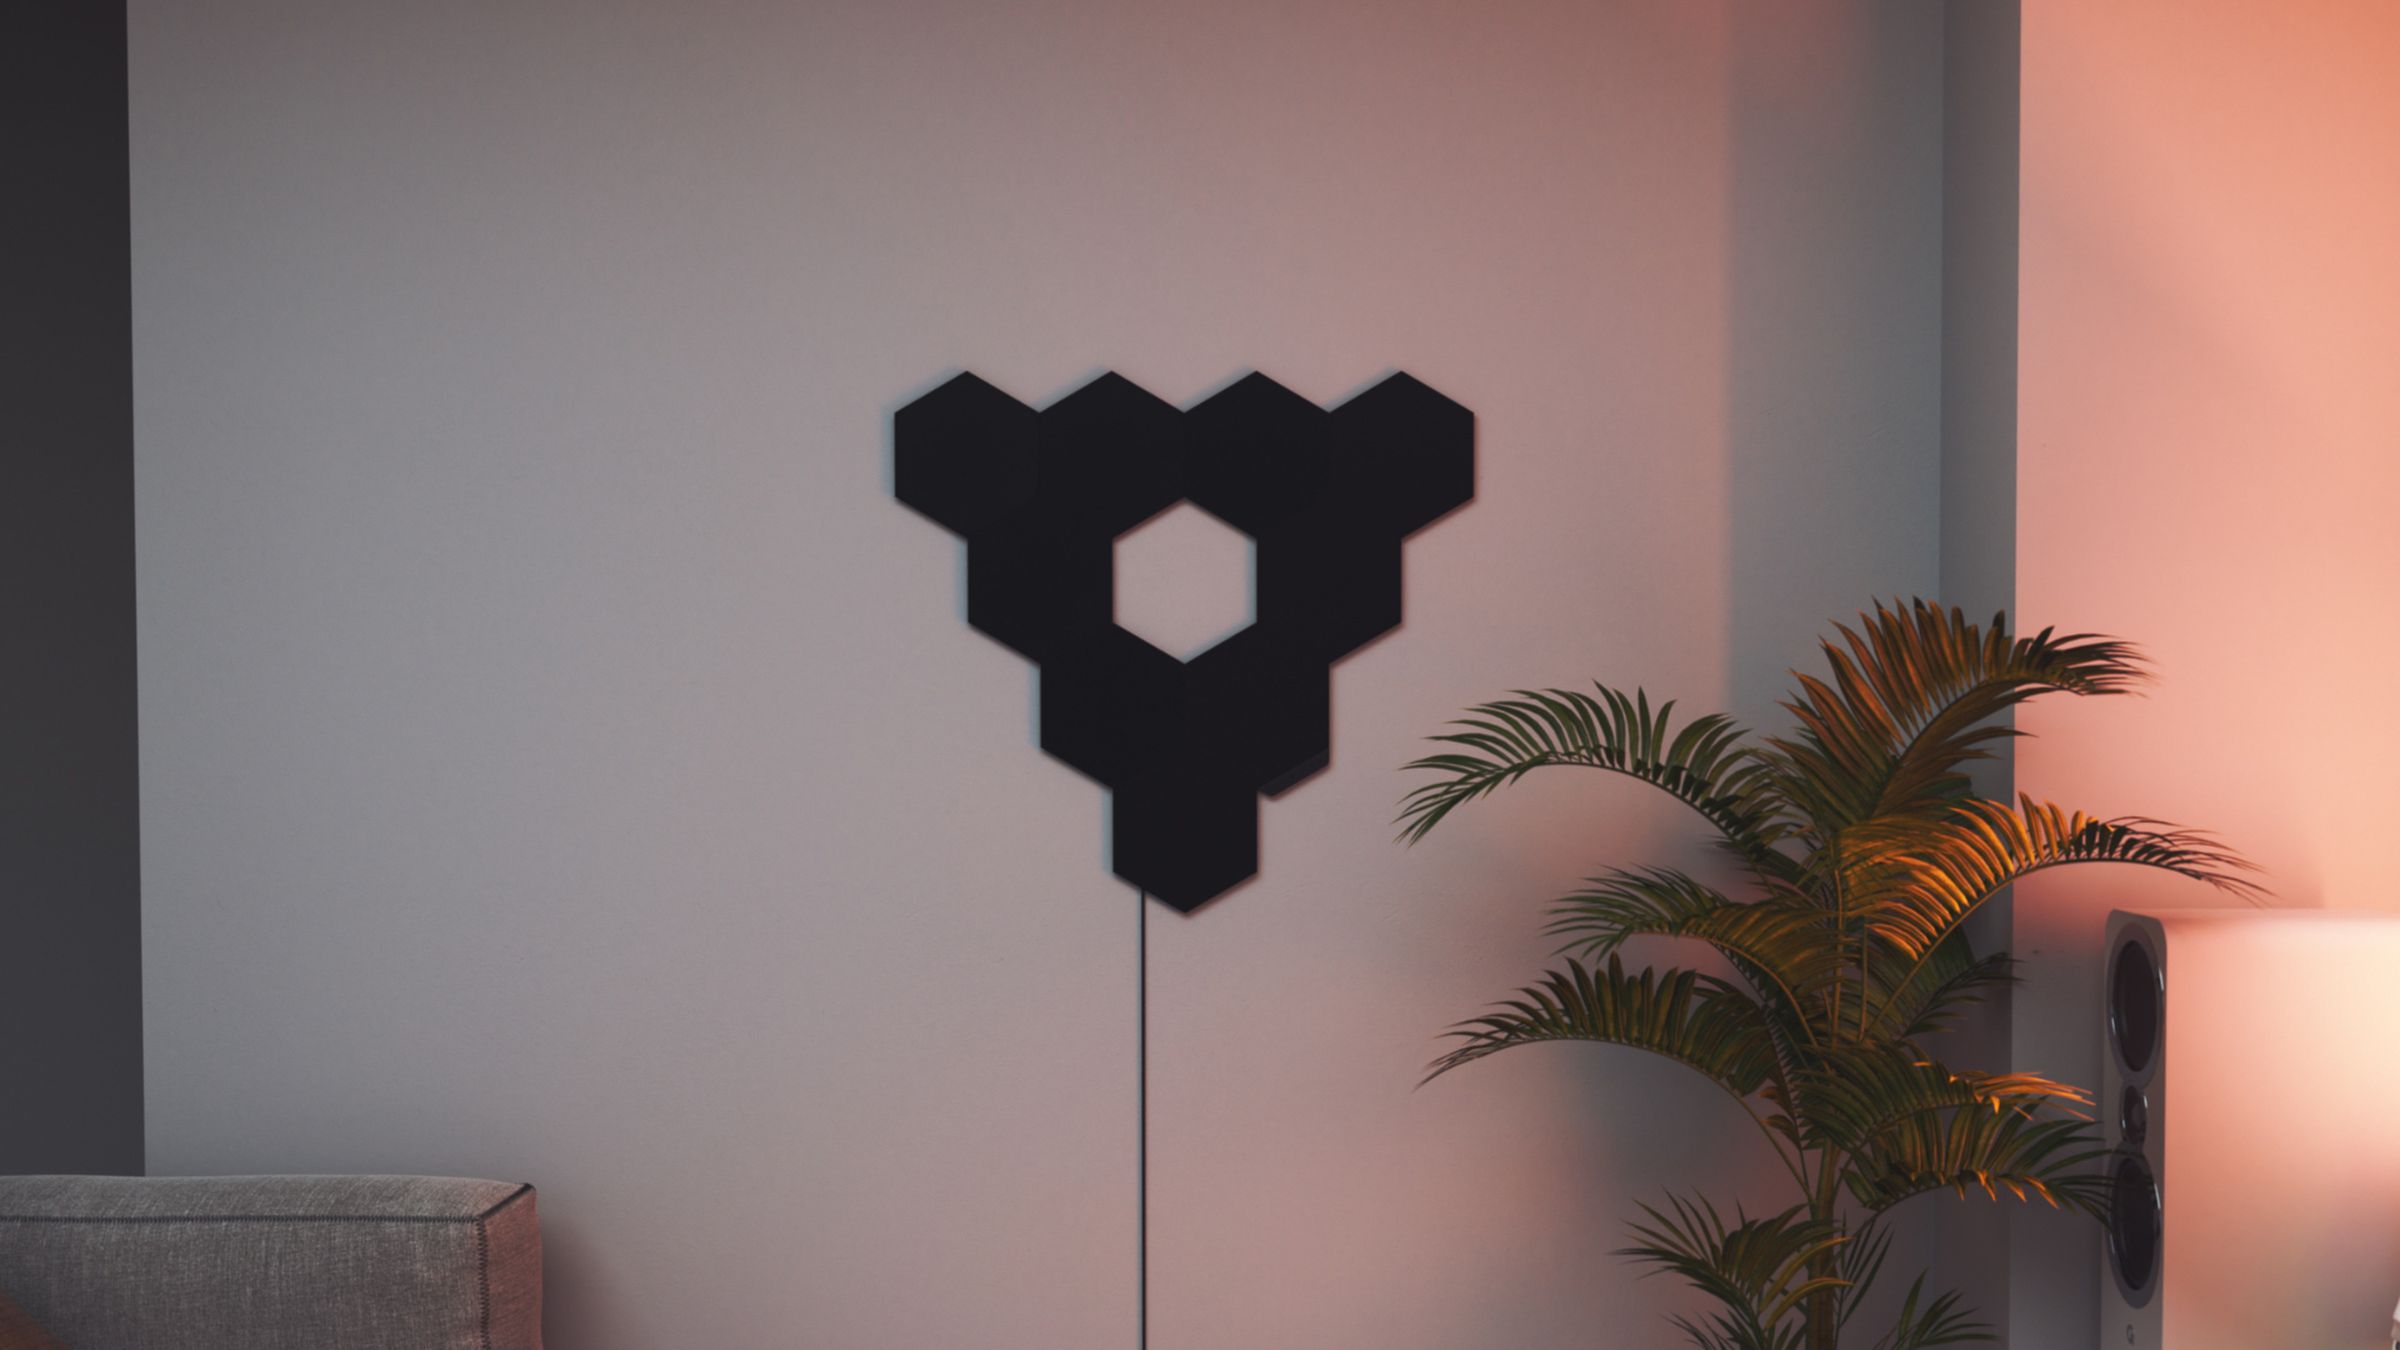 The Nanoleaf Shapes Ultra Black Hexagon lighting panels against a white wall.